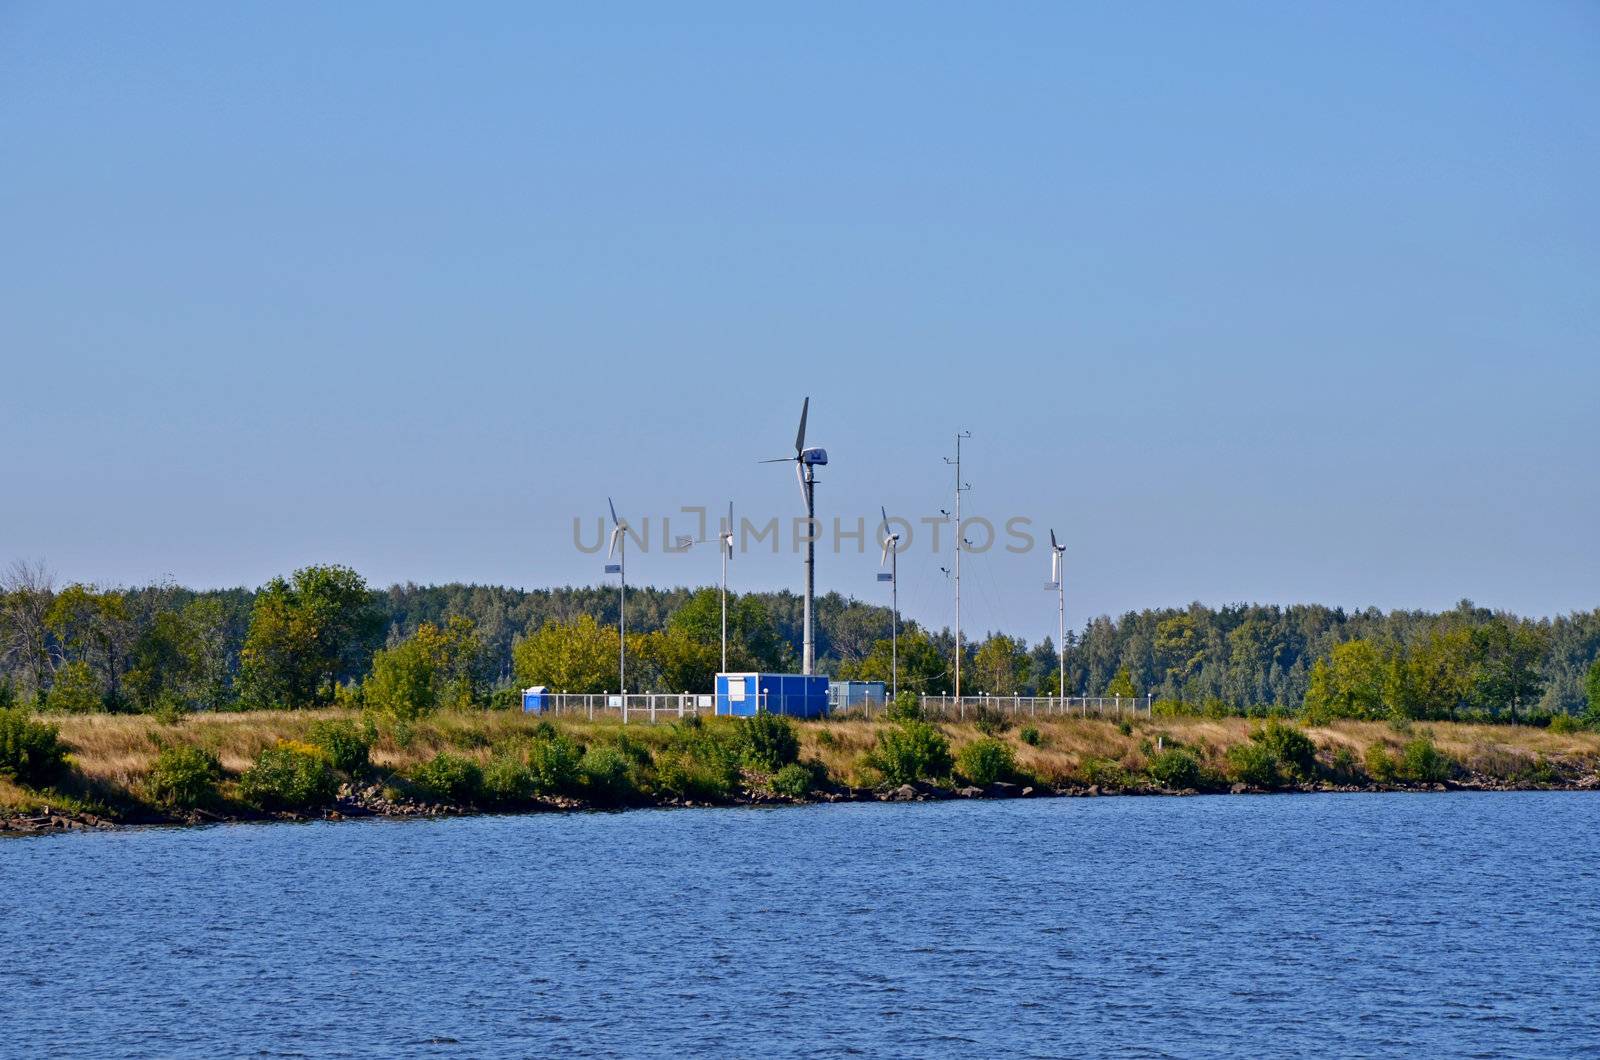 Kind on wind-driven generators from the city of Dubna of Moscow Region